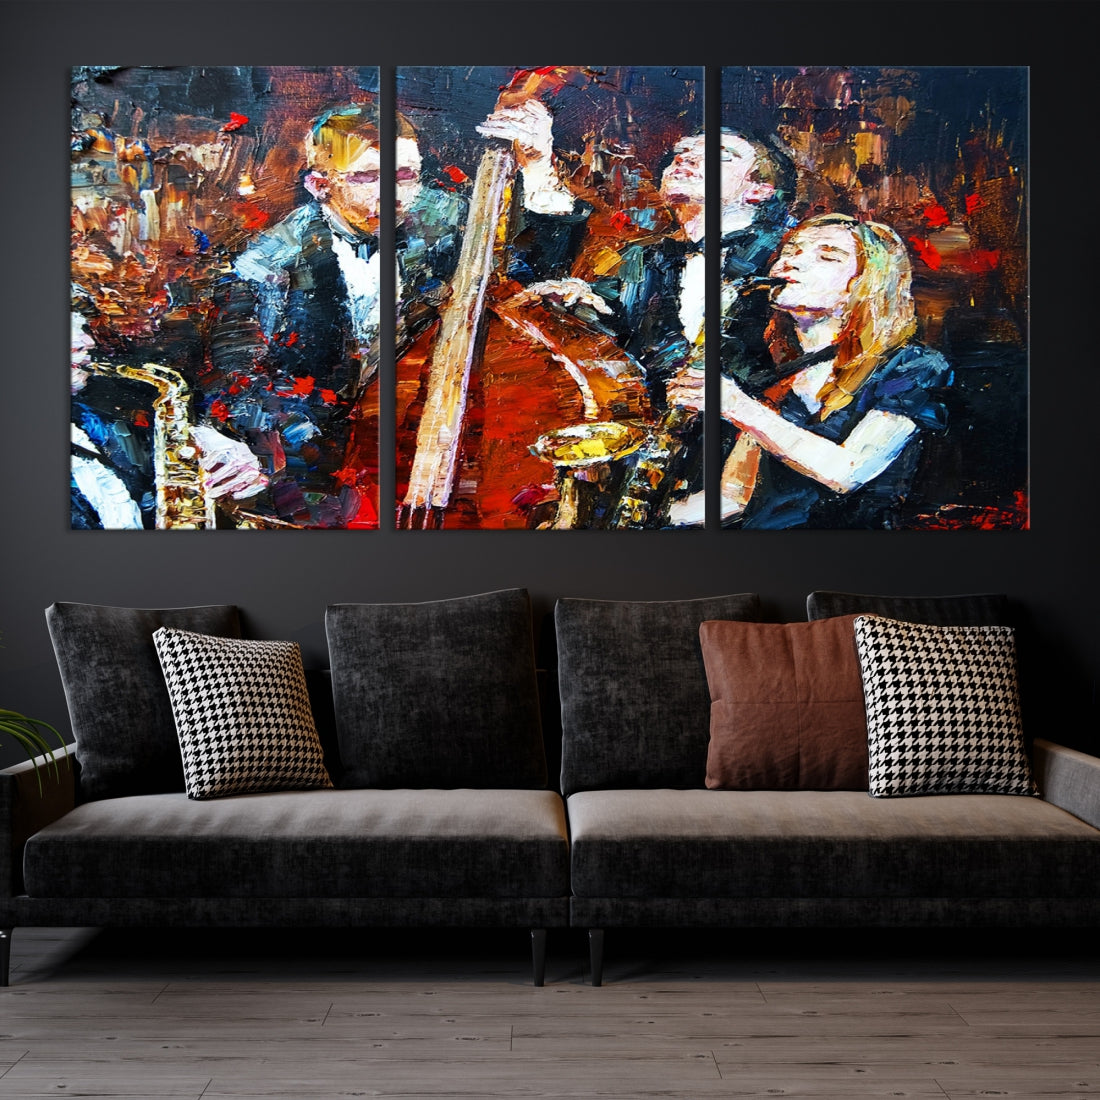 Soulful Sound of Jazz with Our Abstract Afro American Jazz Musician Wall Art Canvas Print